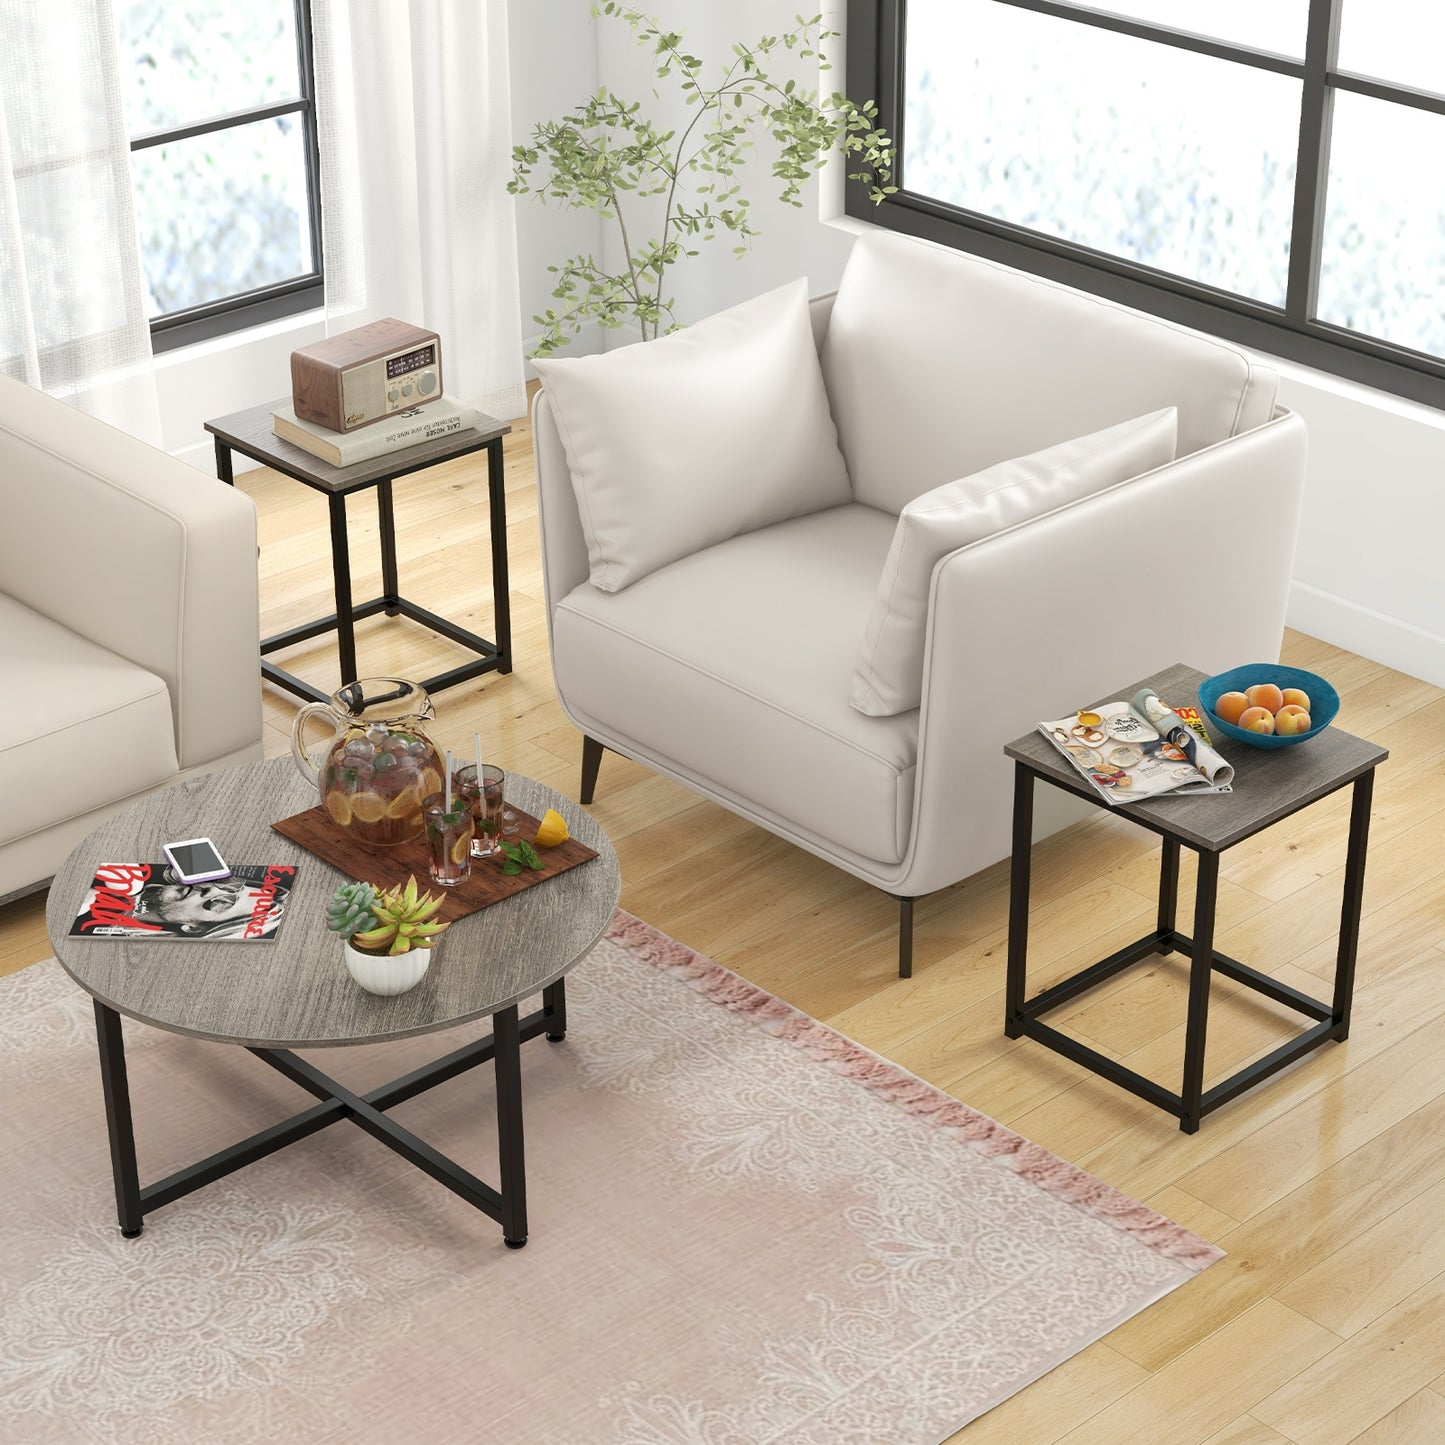 3-Piece Coffee Table Set Round Coffee Table and 2PCS Square End Tables-Gray